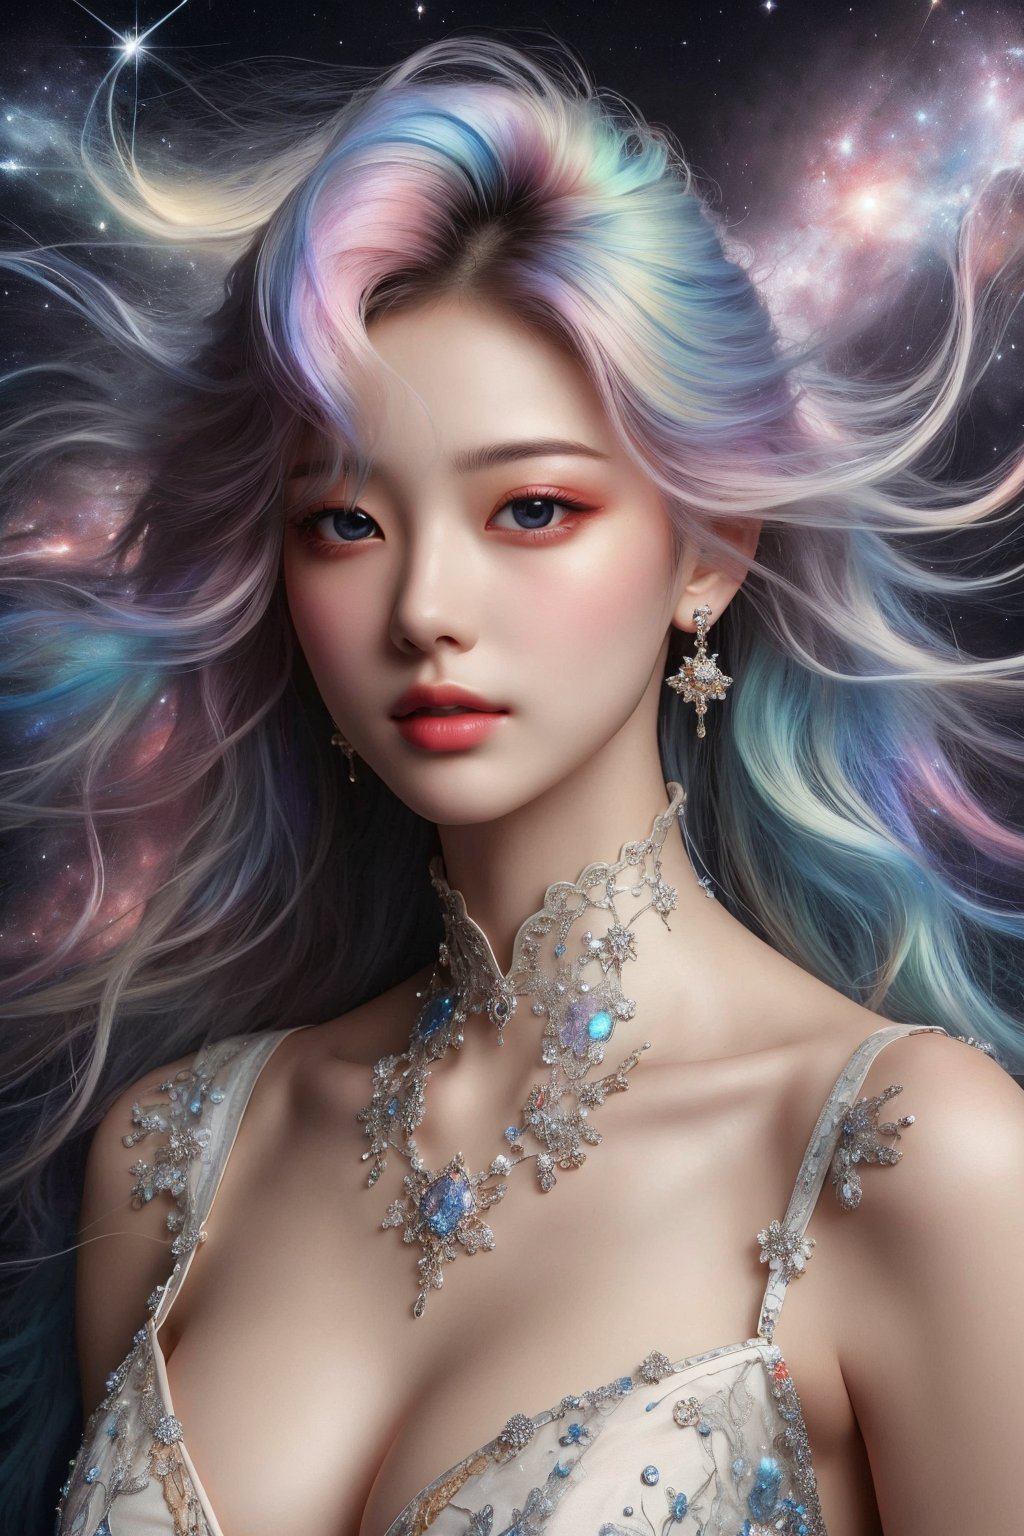 busty and sexy girl, 8k, masterpiece, ultra-realistic, best quality, high resolution, high definition, COSMO, GALAXY,stardust ,Her hair is the highlight, flowing around her head with white to iridescent hues